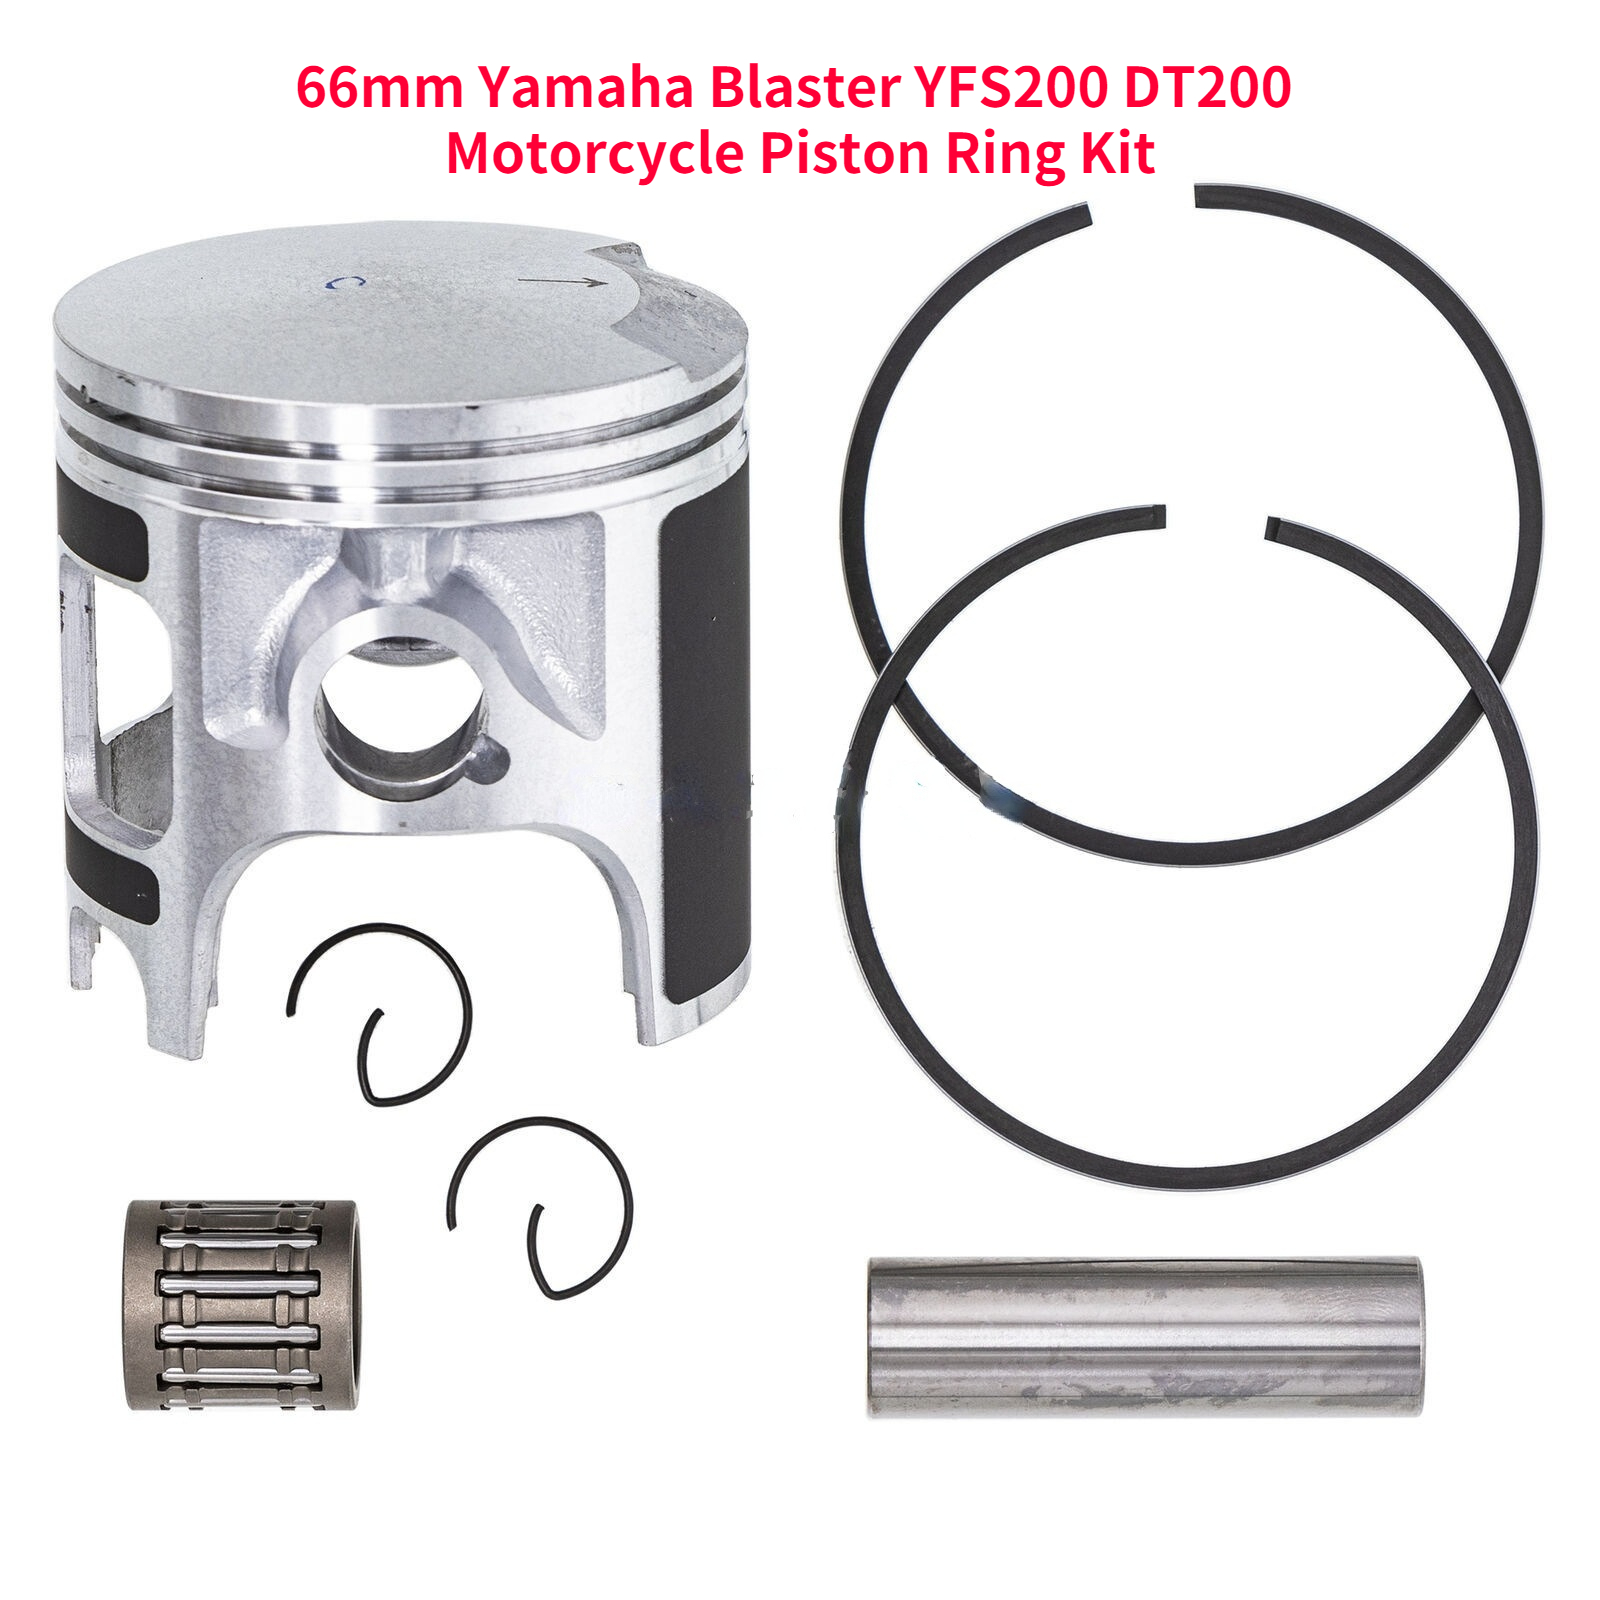 YFS200 Piston Ring Kit For Yamaha Blaster200 YFS 200 DT200 Bore Size 66mm  Motorcycle Engine Parts Pistons Gasket Sets 1988-2006 Lazada PH